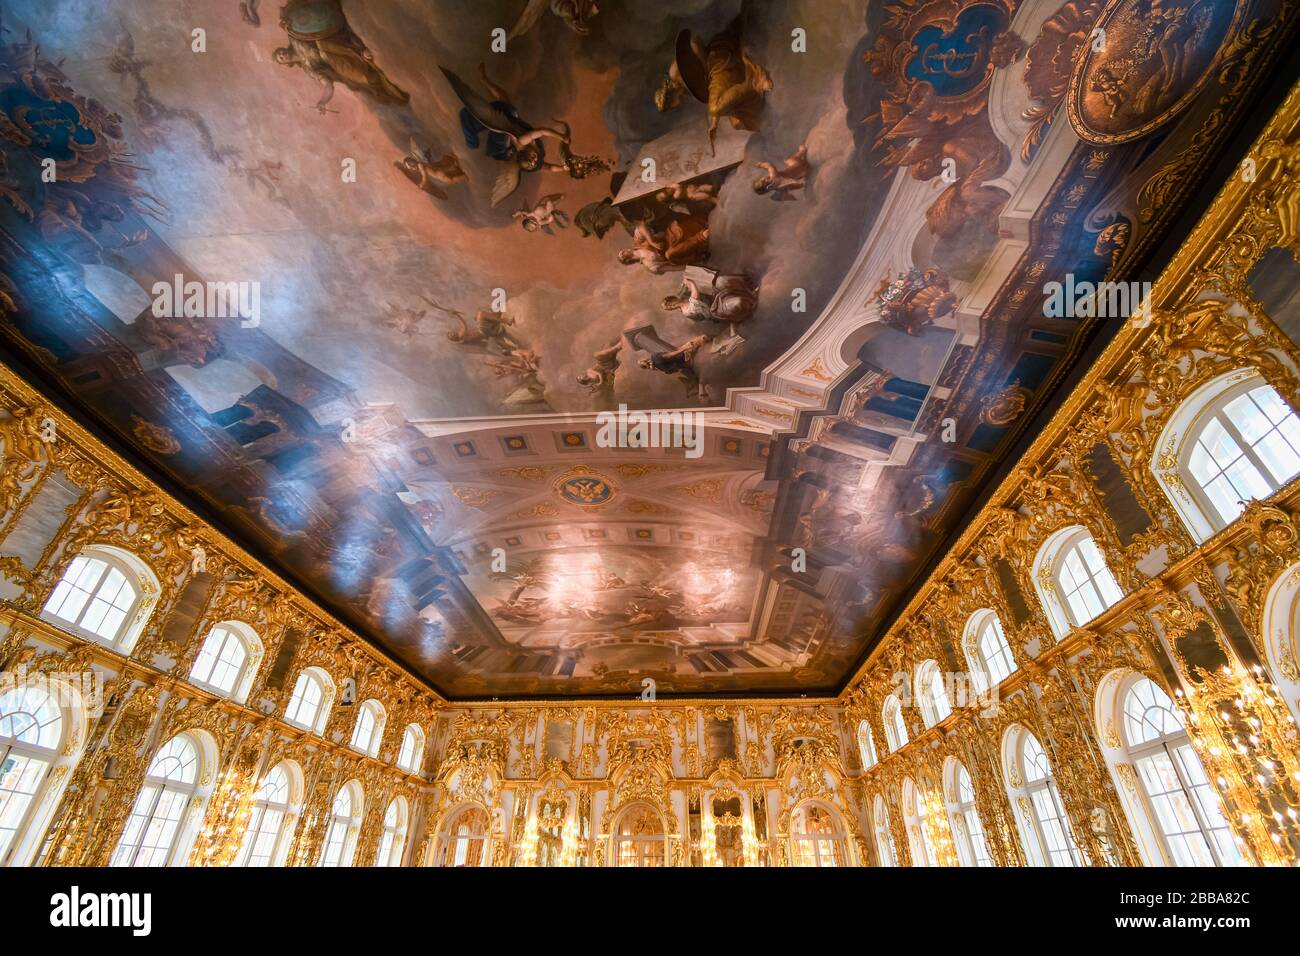 An ornate golden interior ballroom with a colorful painted ceiling inside the Rococo Catherine Palace at Pushkin near St. Petersburg, Russia. Stock Photo